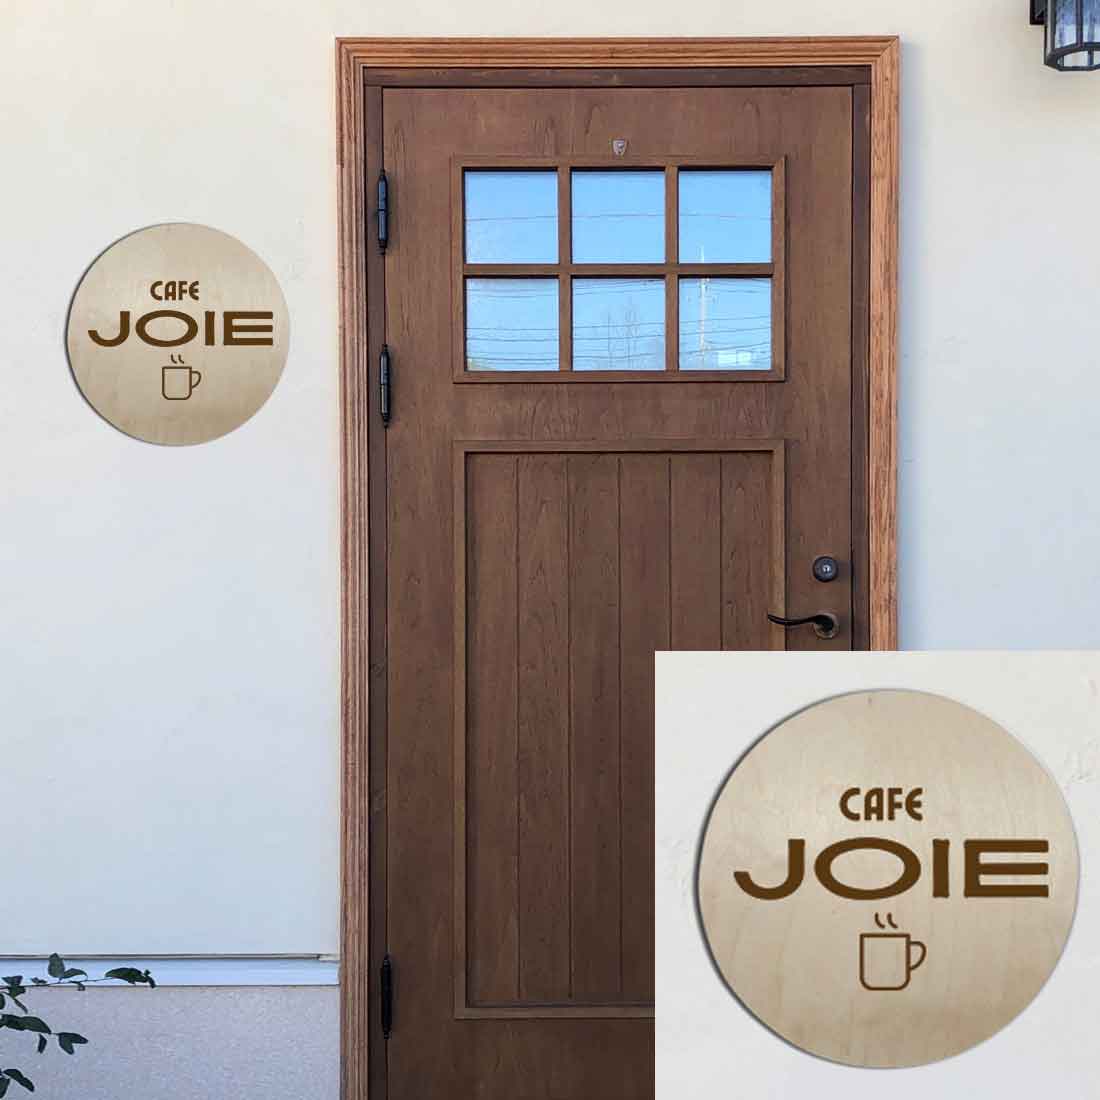 Customized Engraved Round Wooden Name Plate for House Outdoor Entrance